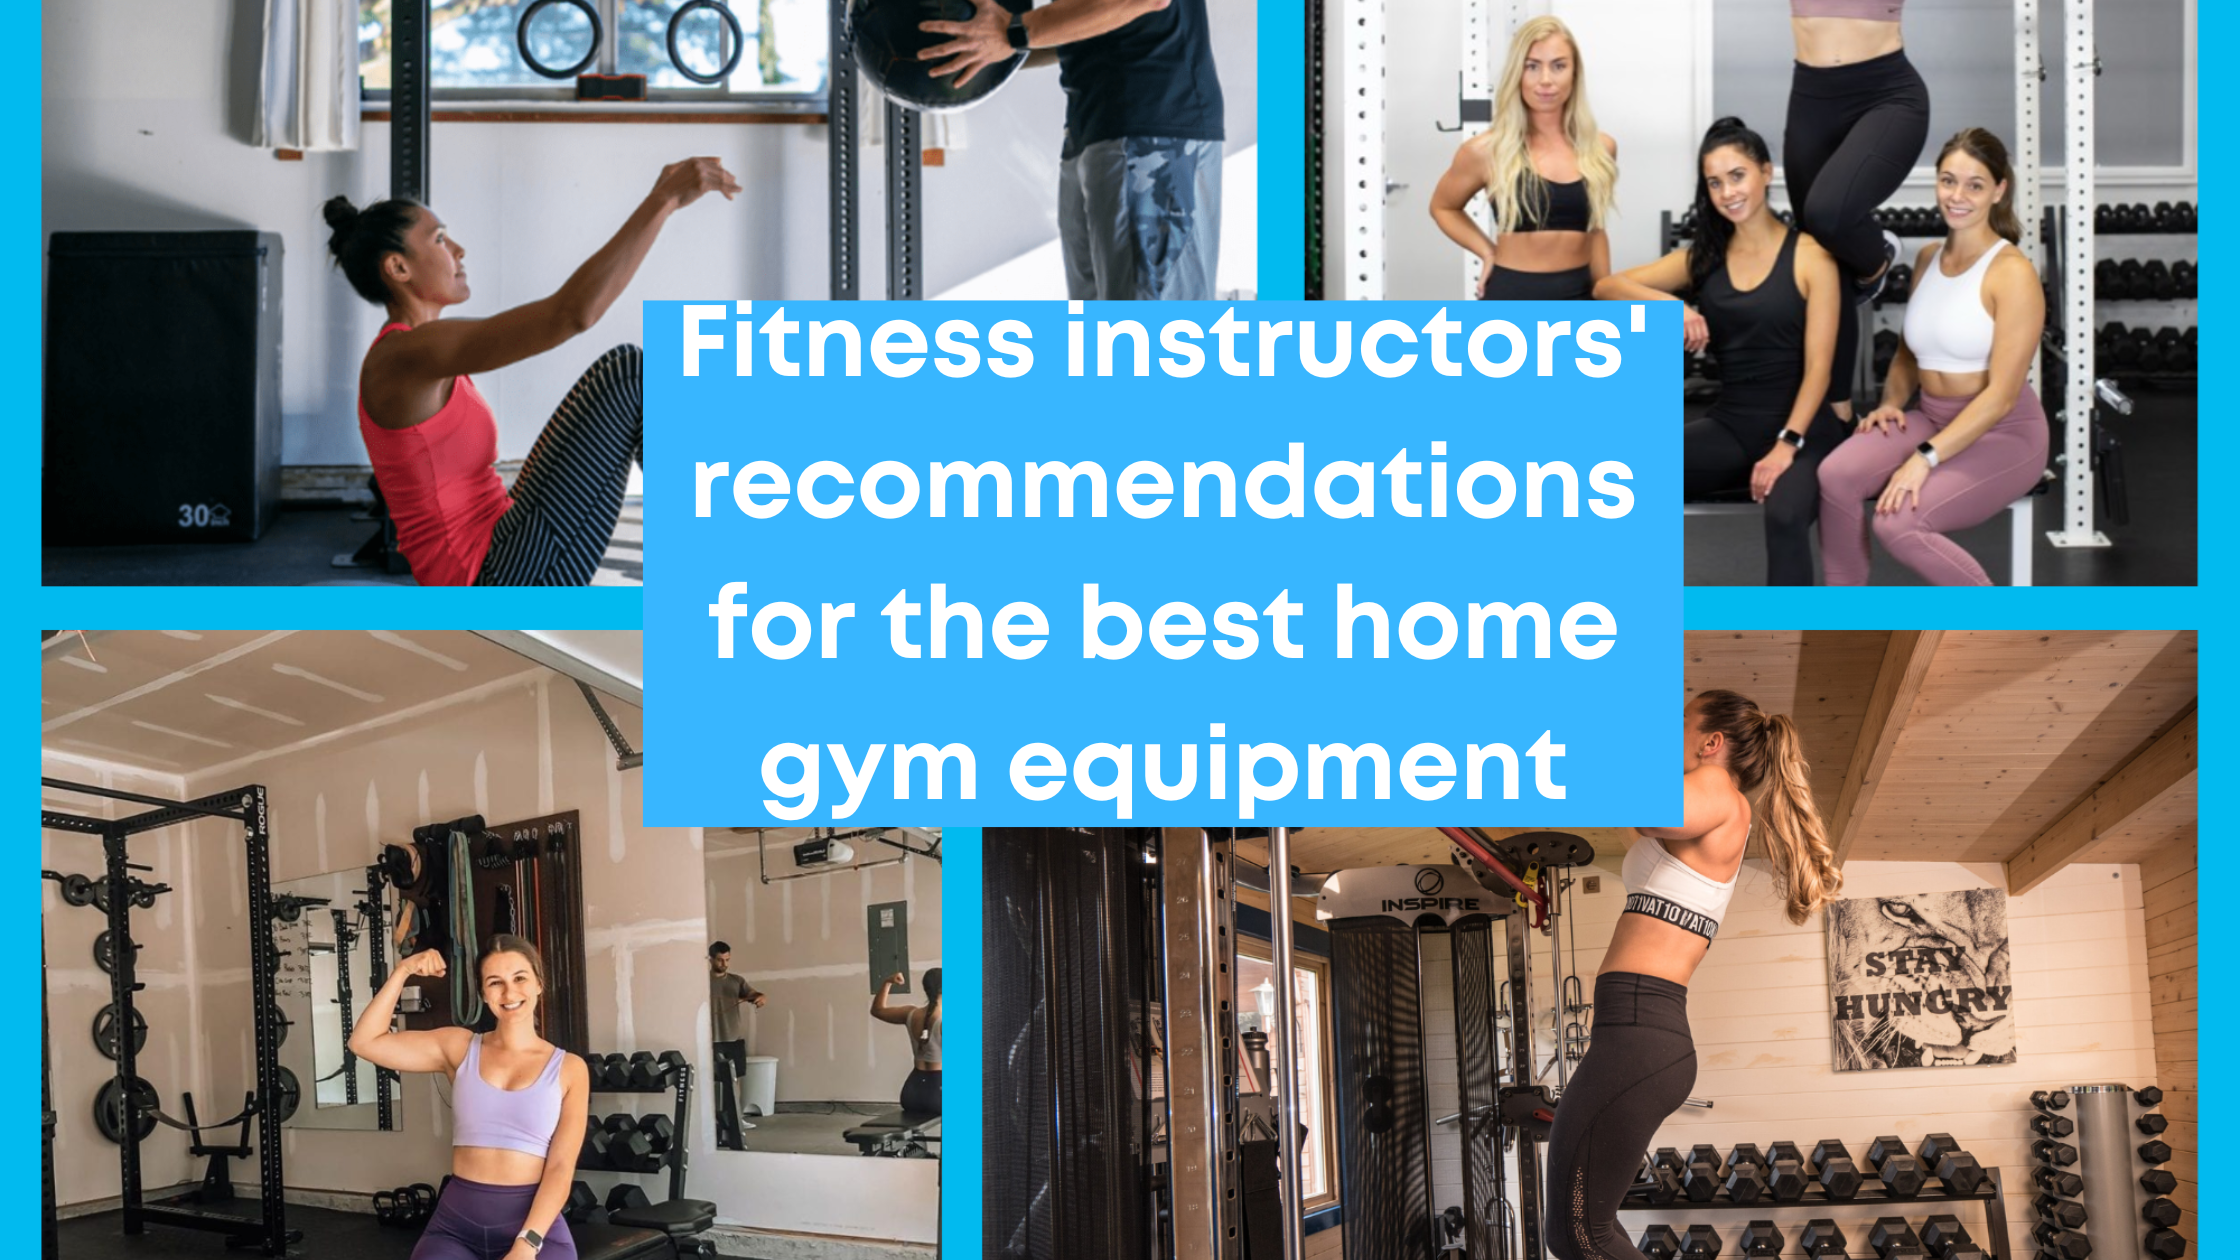 Fitness instructors' recommendations for the best home gym equipment